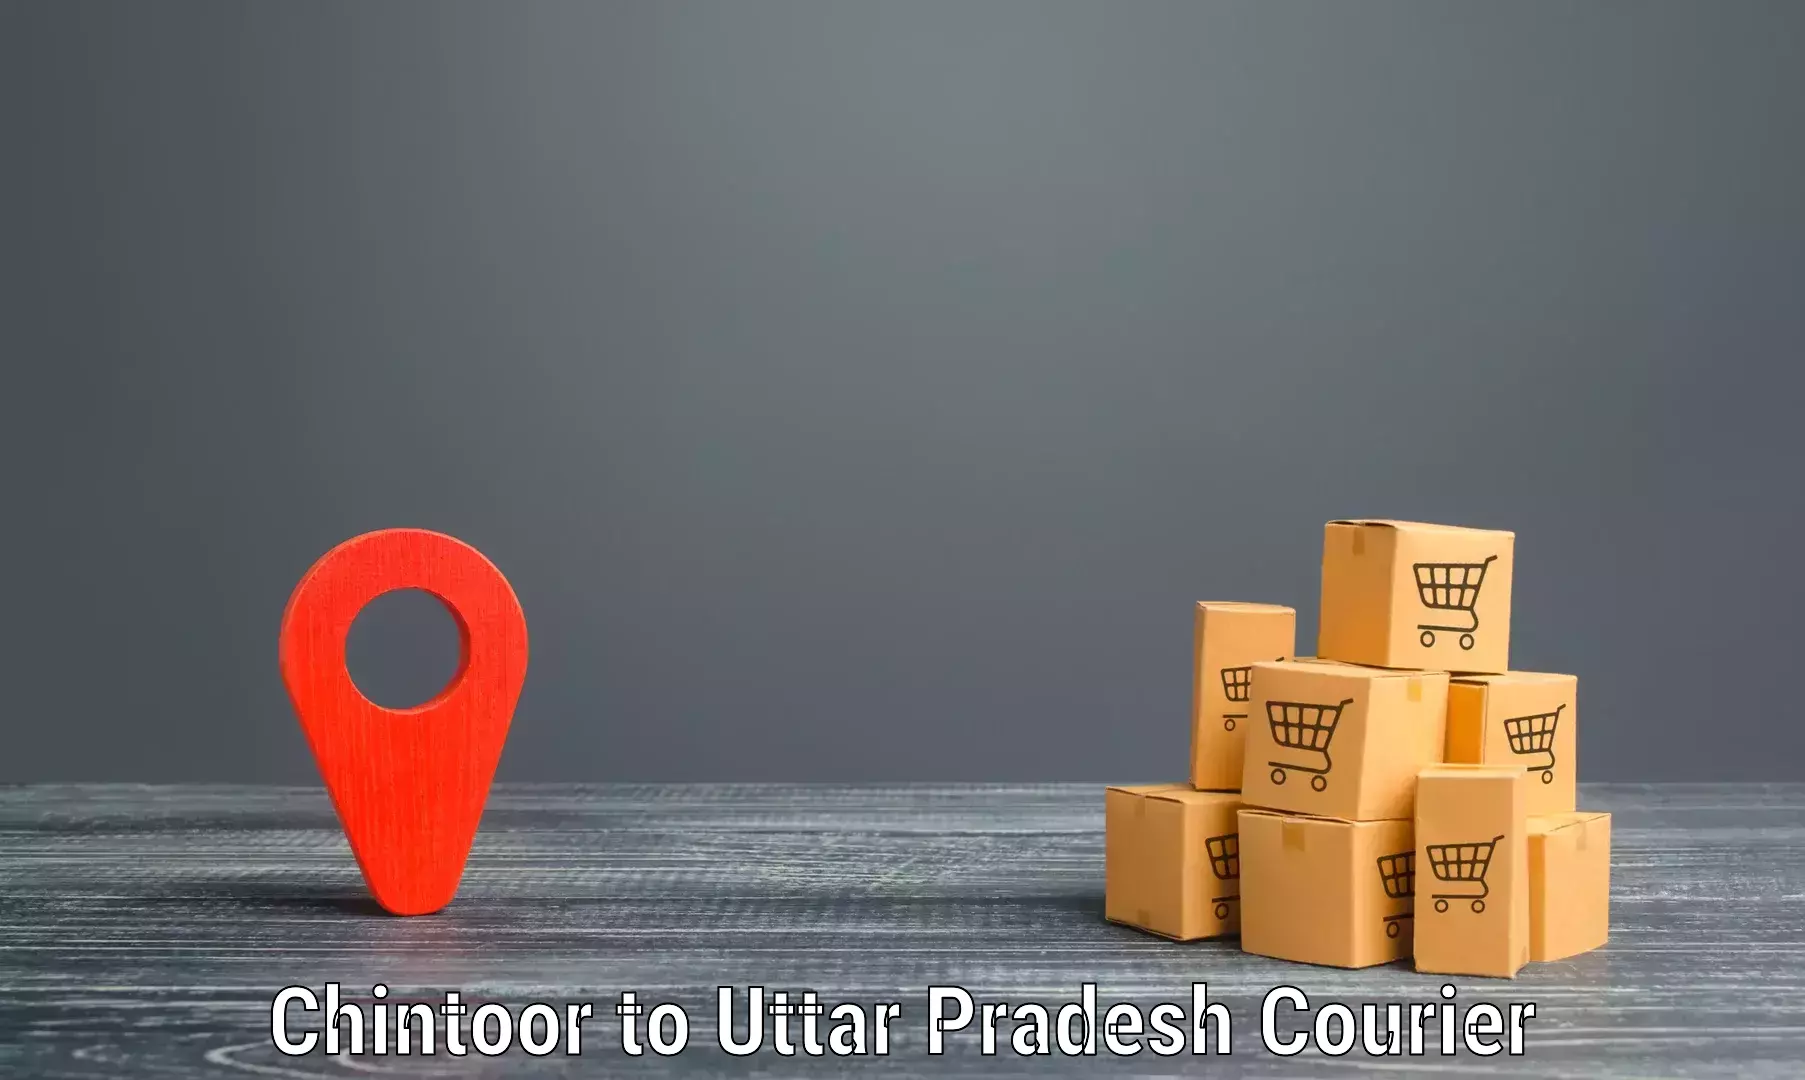 Courier service innovation Chintoor to Sambhal